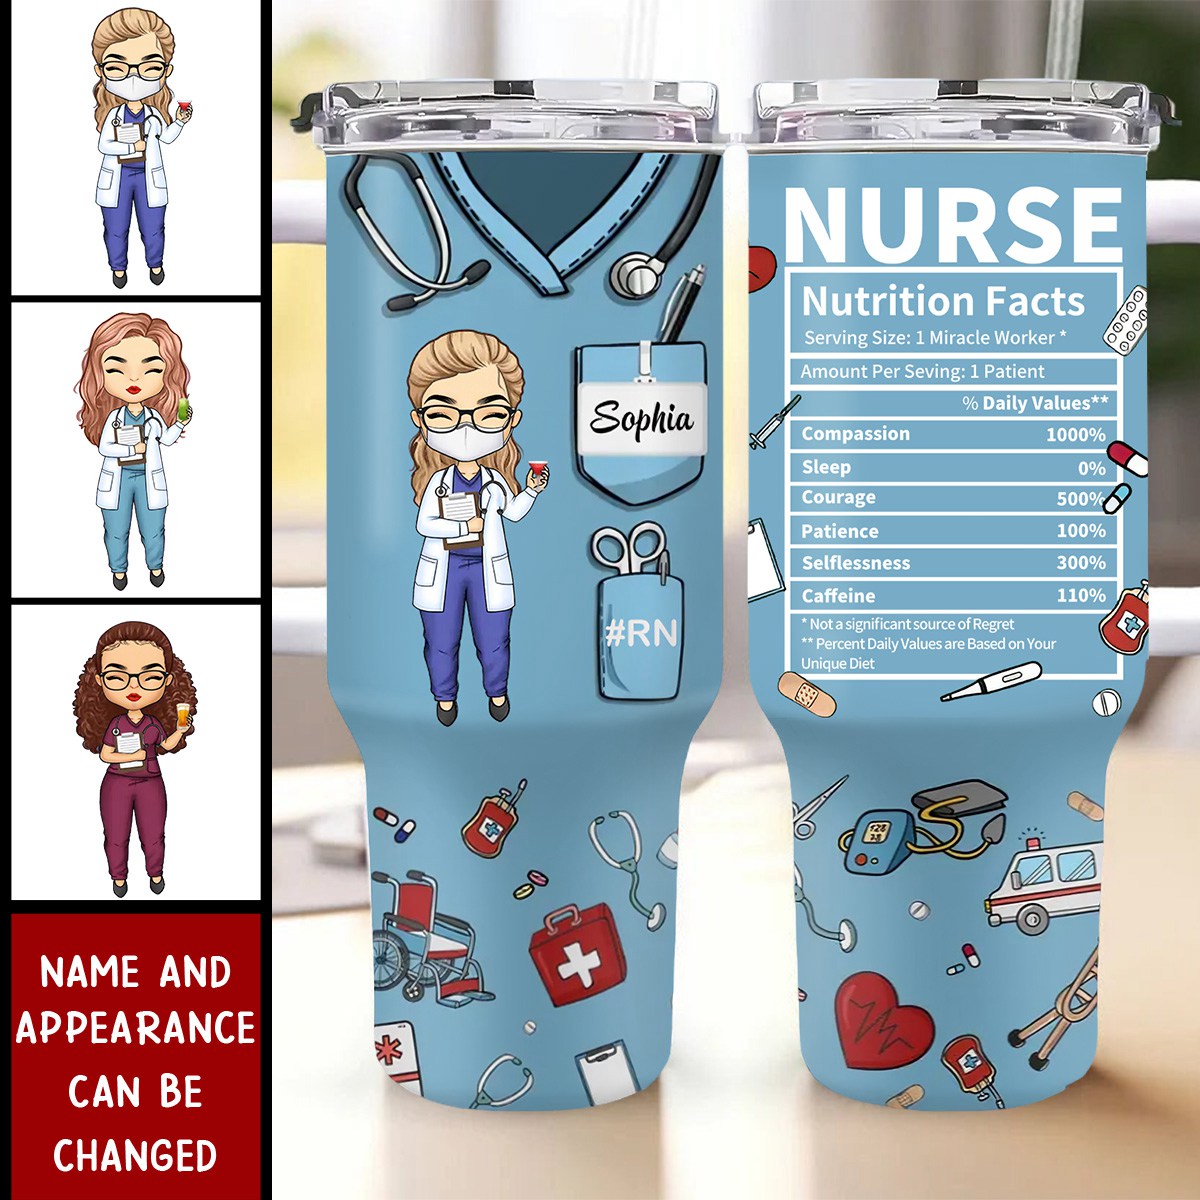 Nursing Is The Art Of Healing And Compassion - Nurse Personalized Custom 40 Oz Stainless Steel Tumbler With Handle